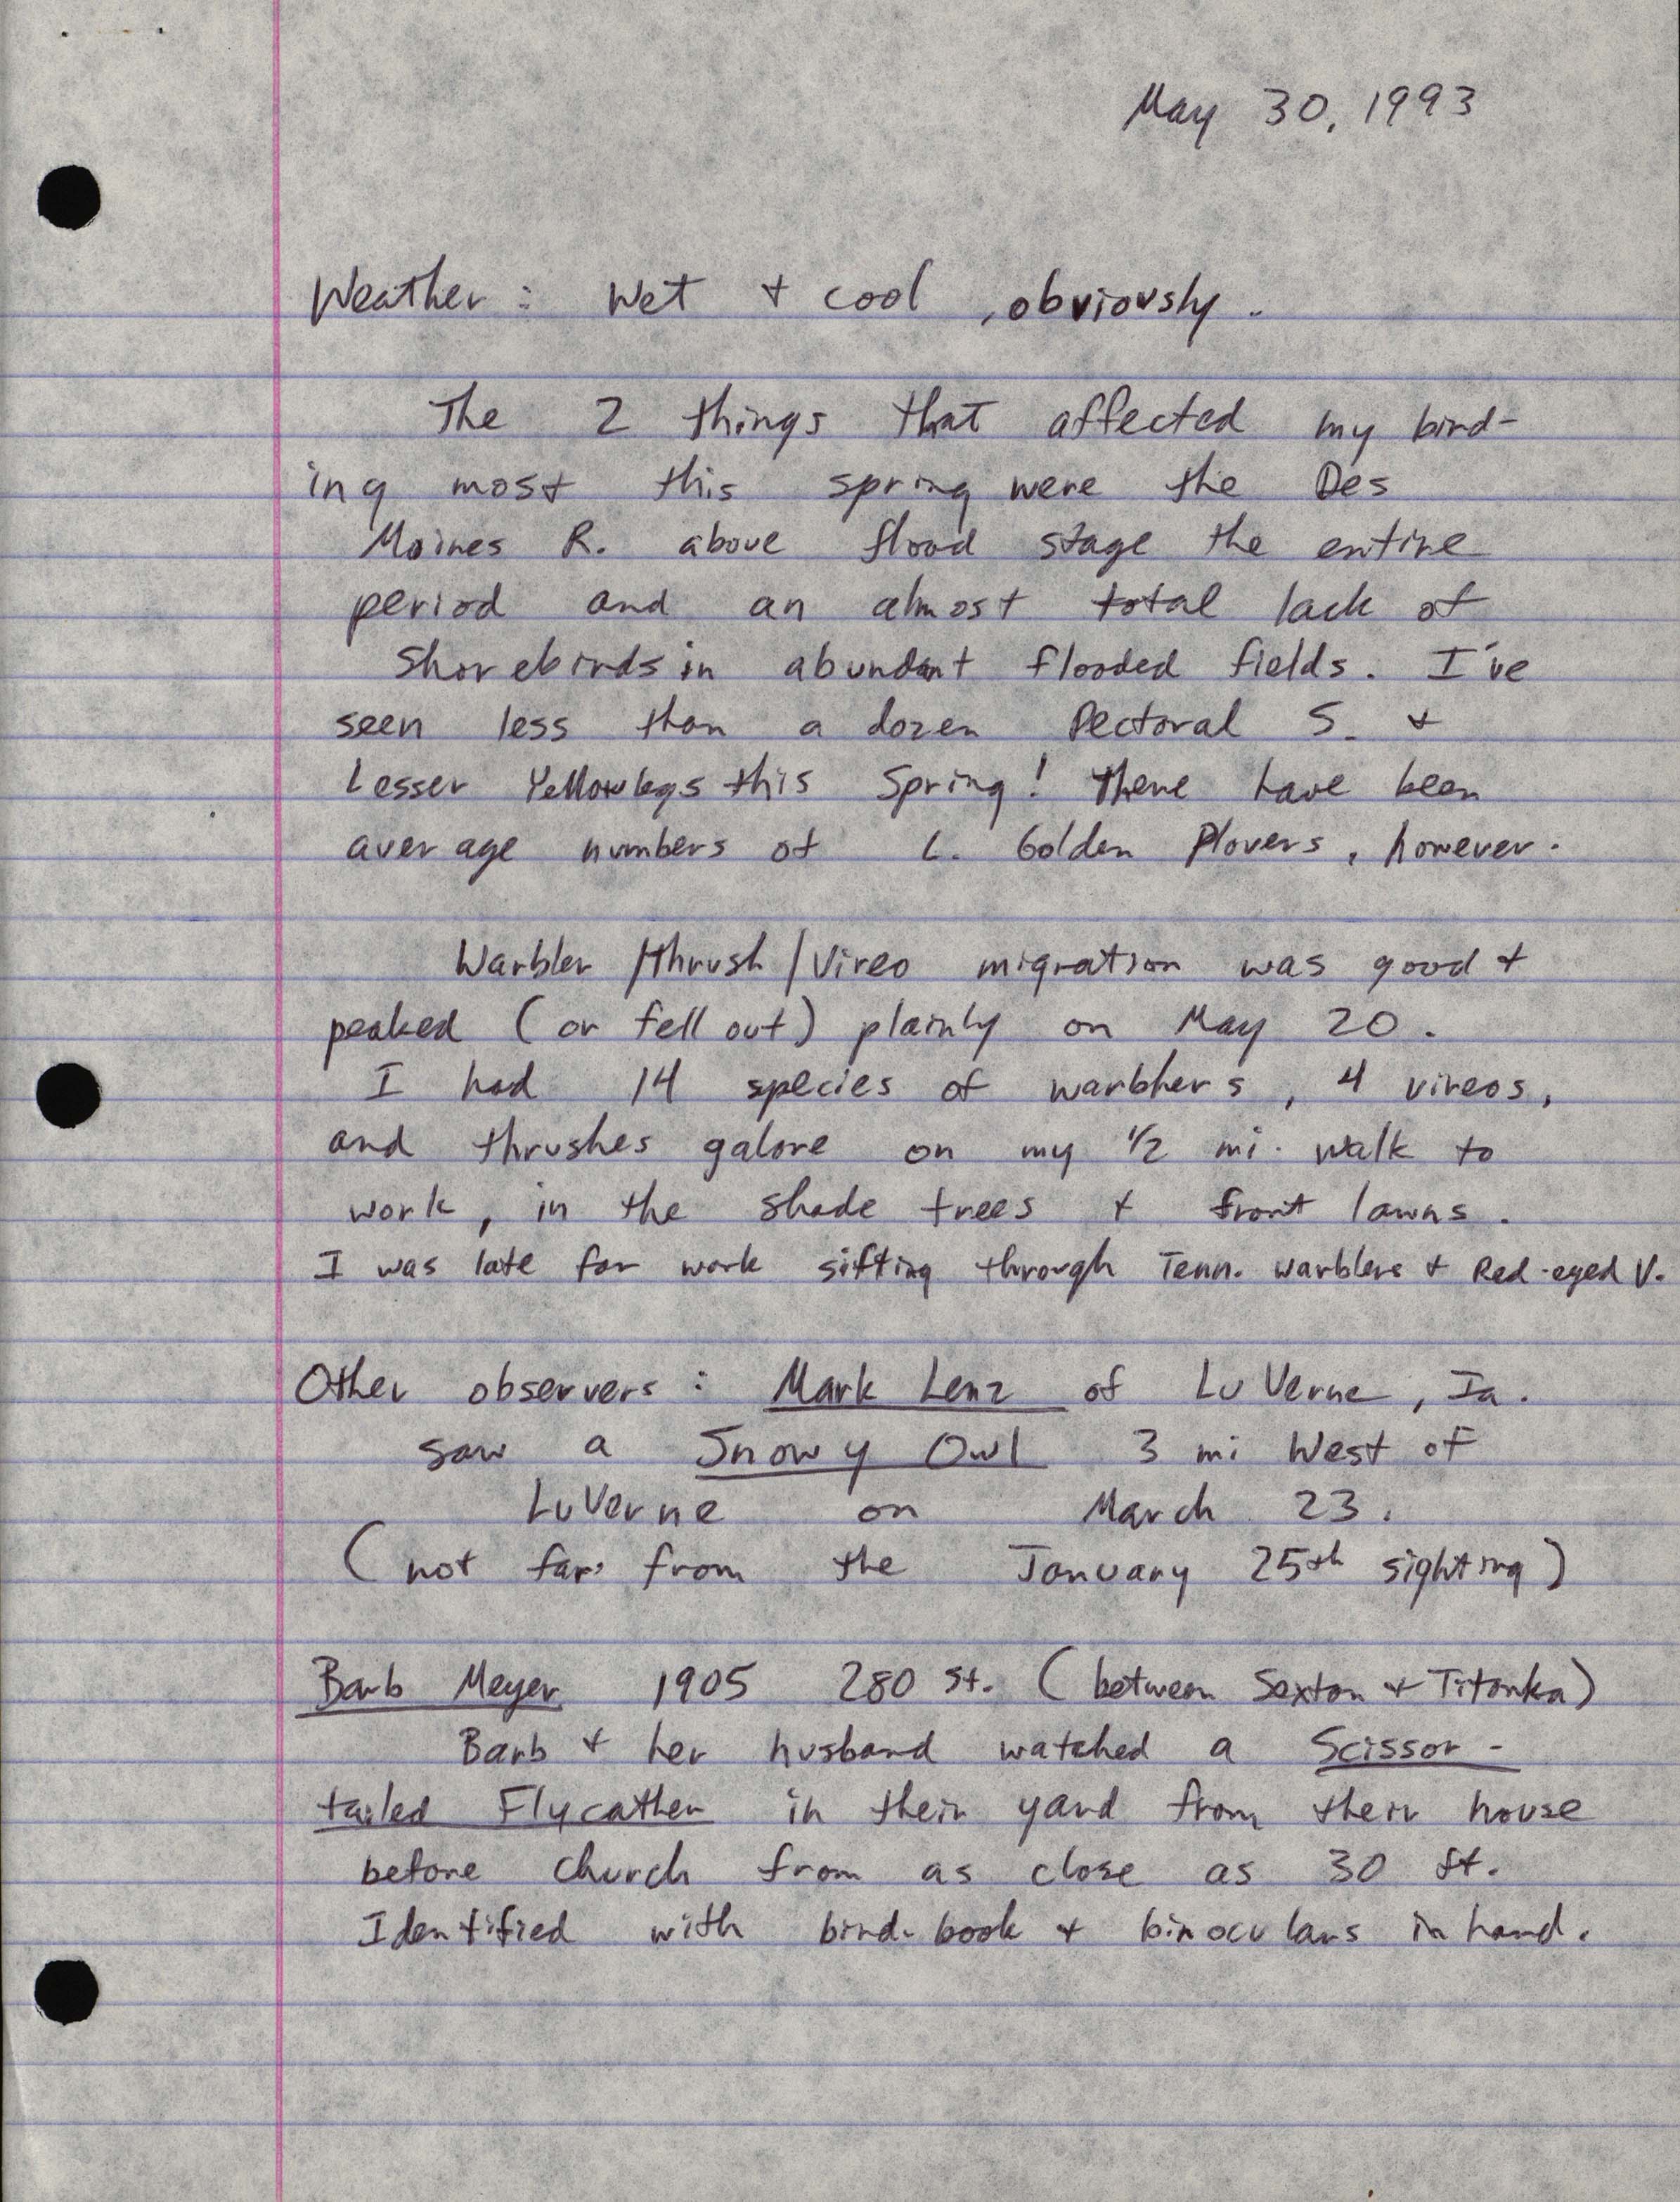 Matt Kenne note regarding weather and migration information, May 30, 1993